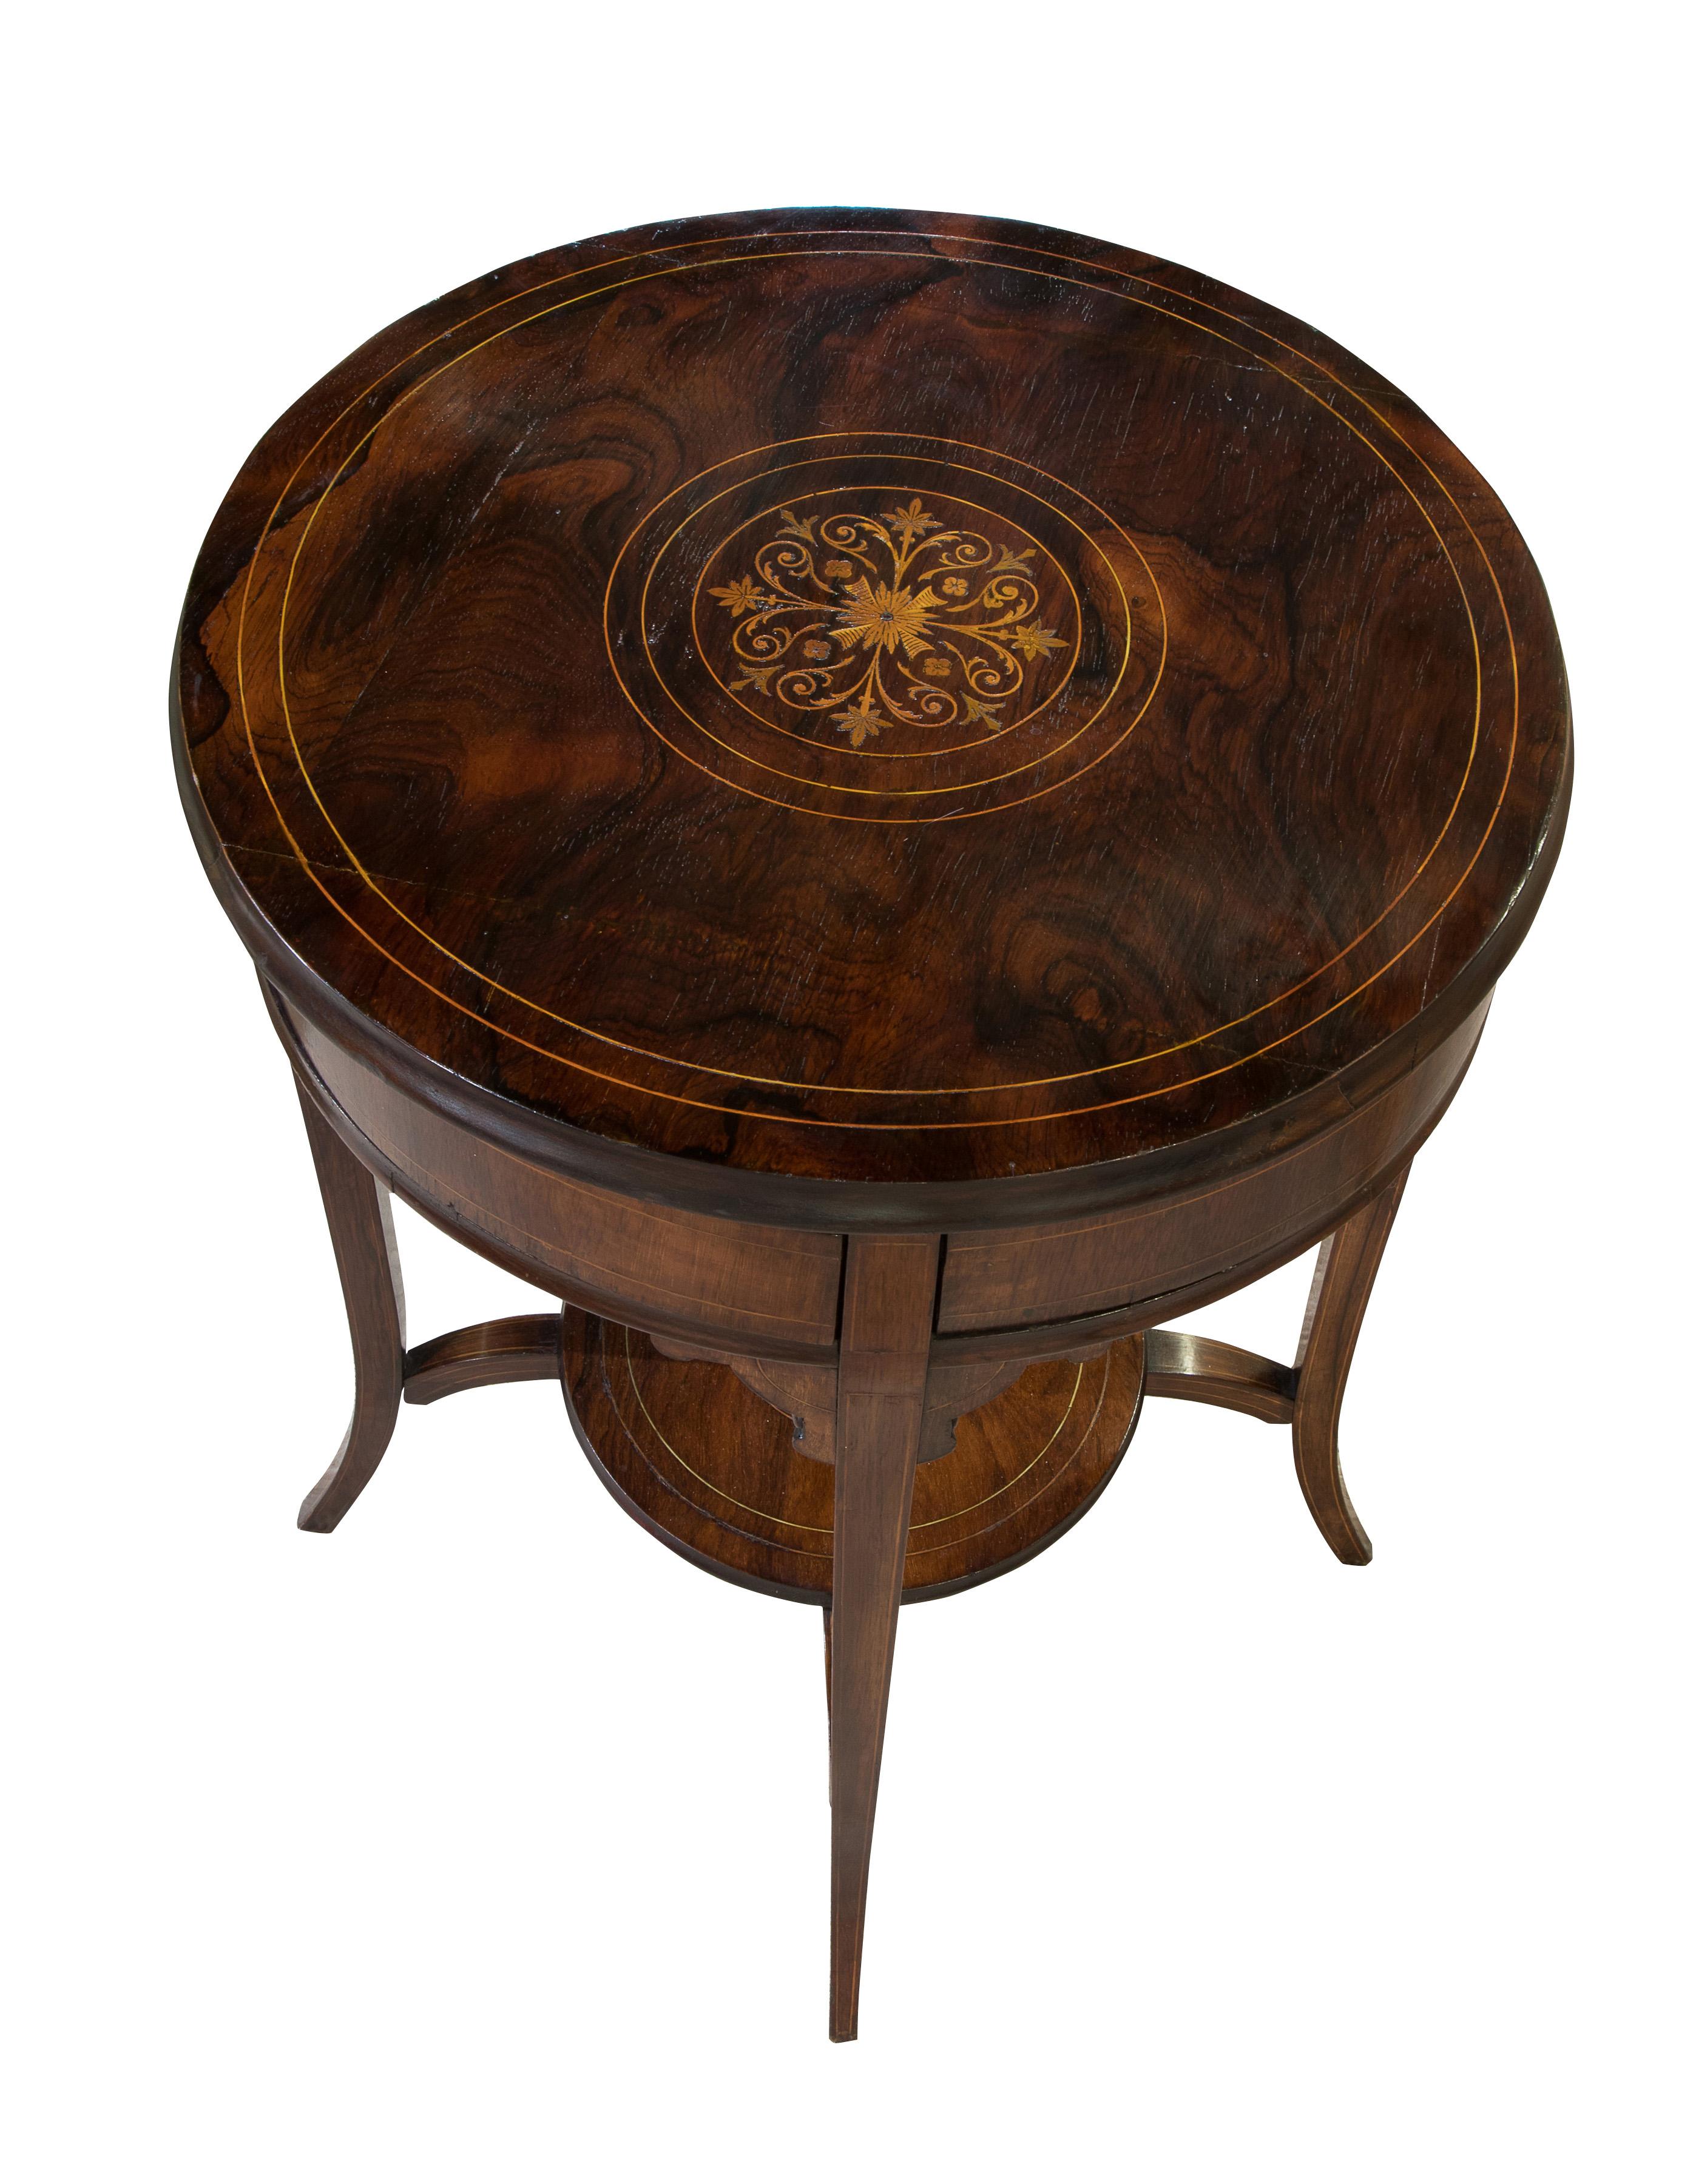 Victorian Circular Inlaid Drum Table with Rotating Top to Reveal Four Drawers For Sale